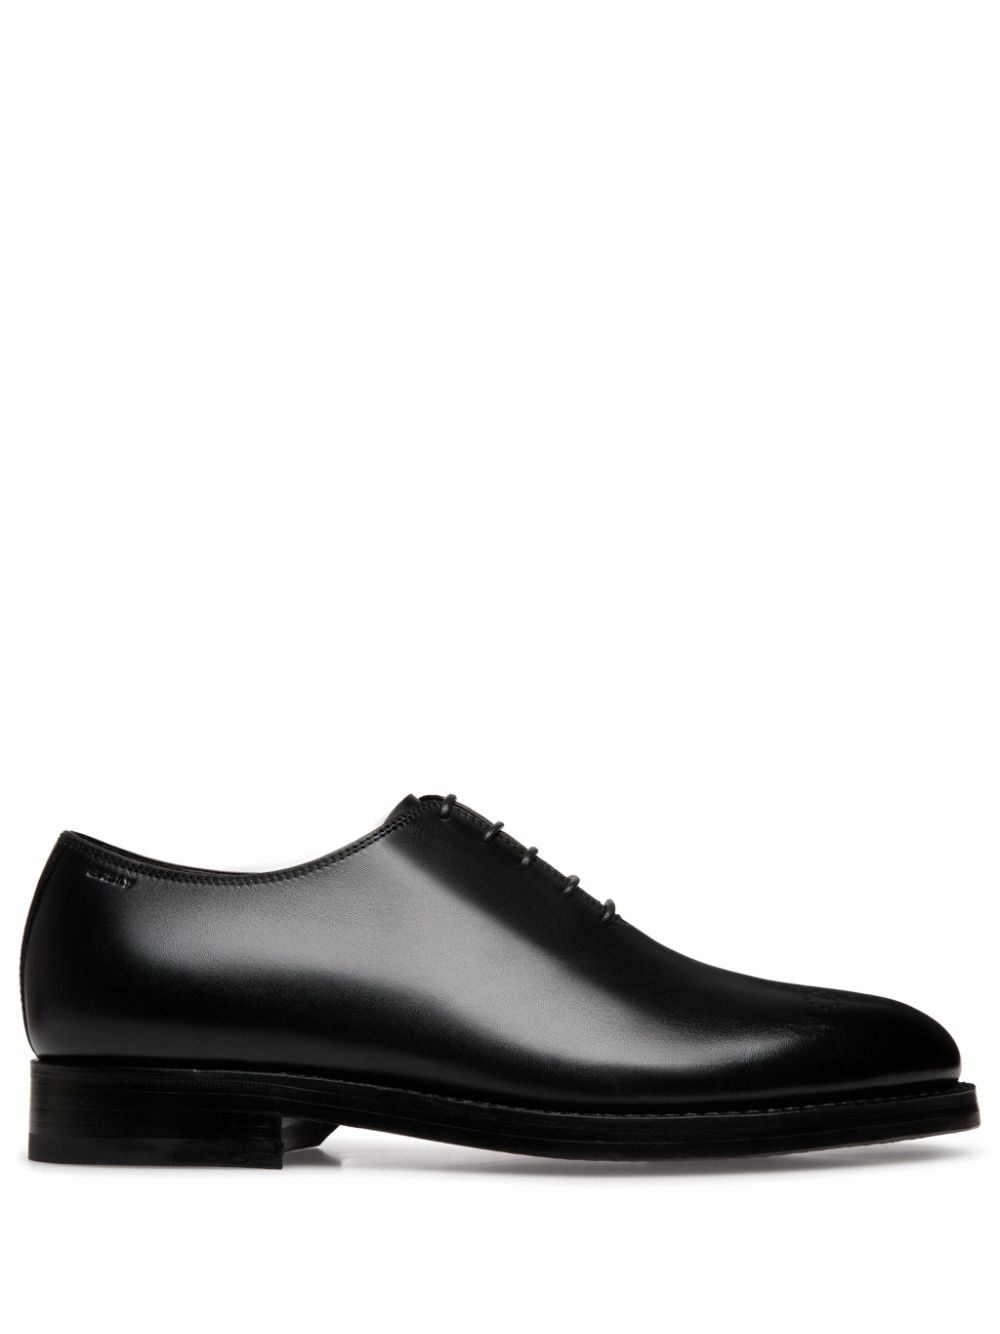 Bally lace-up leather oxford shoes - Black von Bally